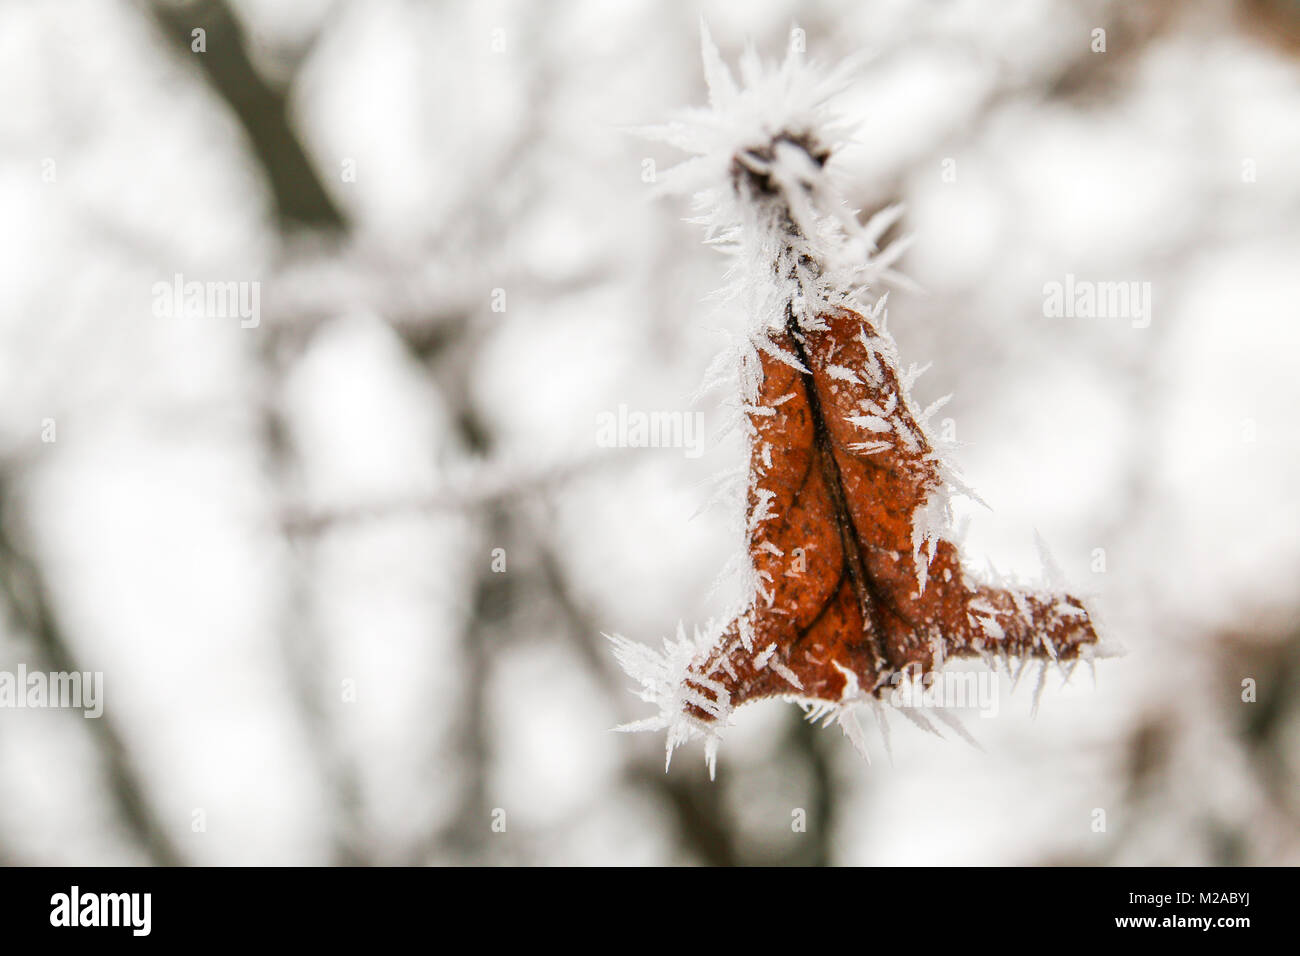 A detail picture of the frozen branch with a dry oak leaf on it. Stock Photo